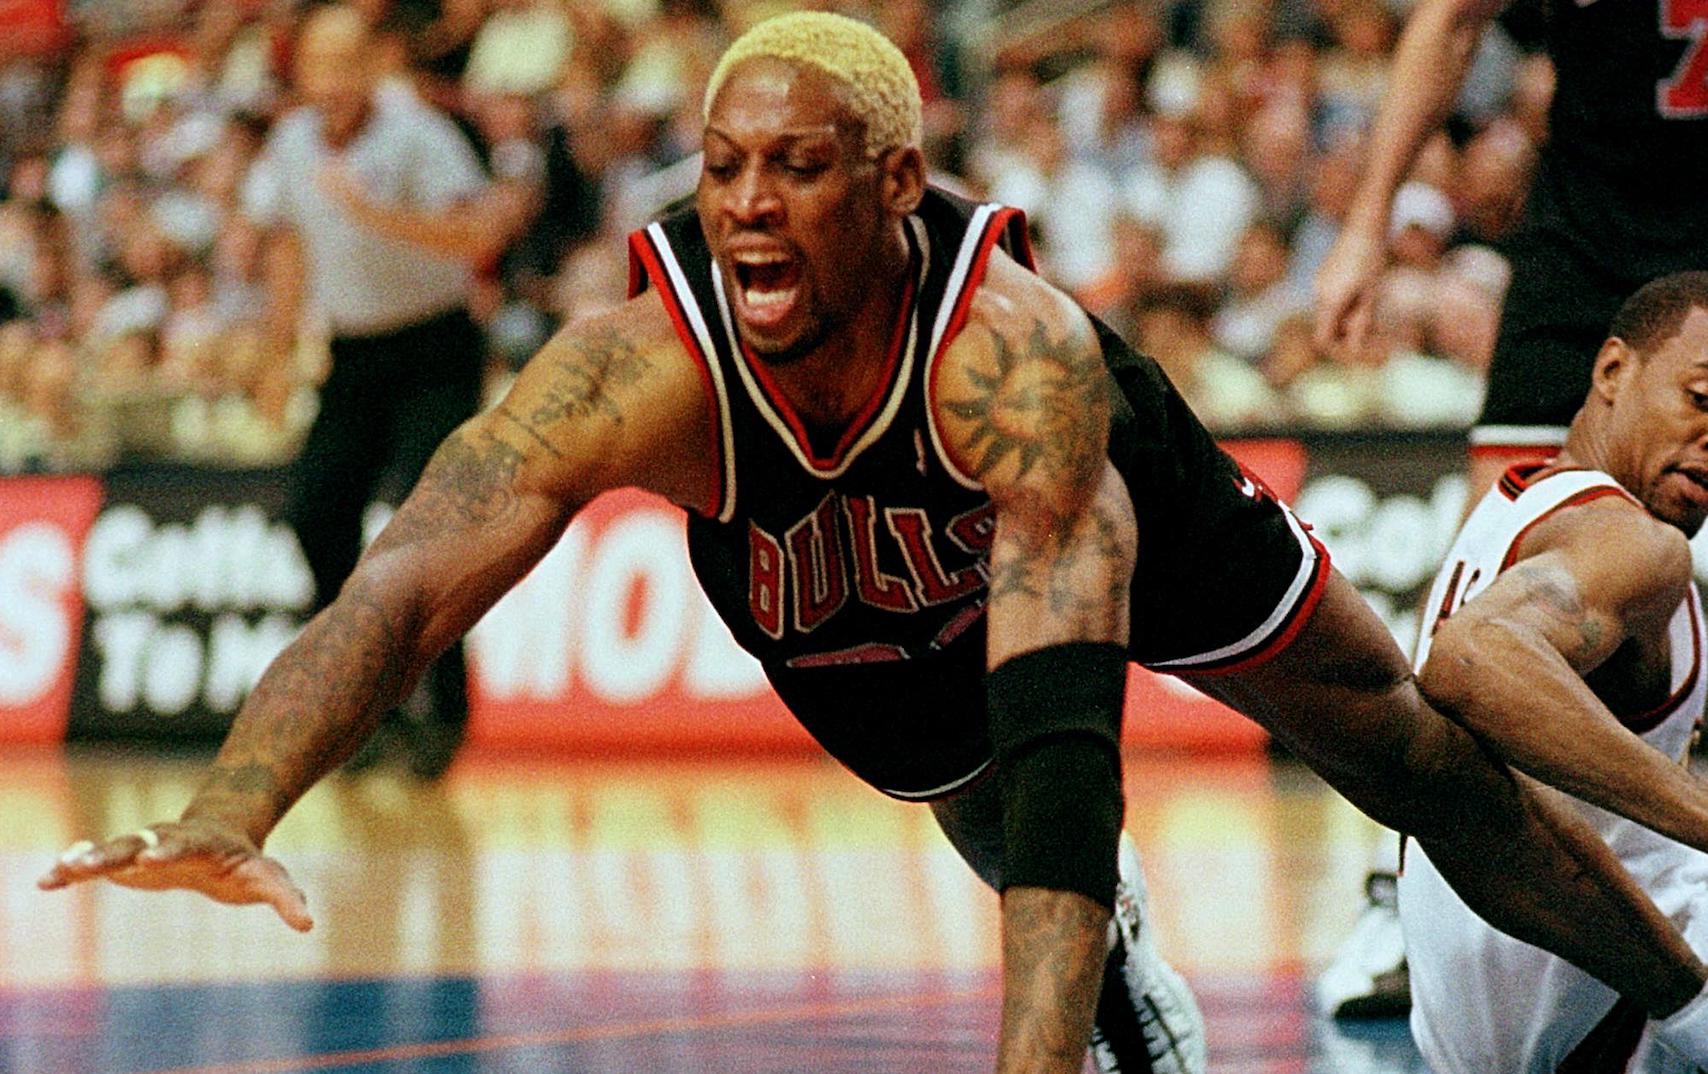 While Dennis Rodman may be known for his colorful personality, he was also an elite rebounder.